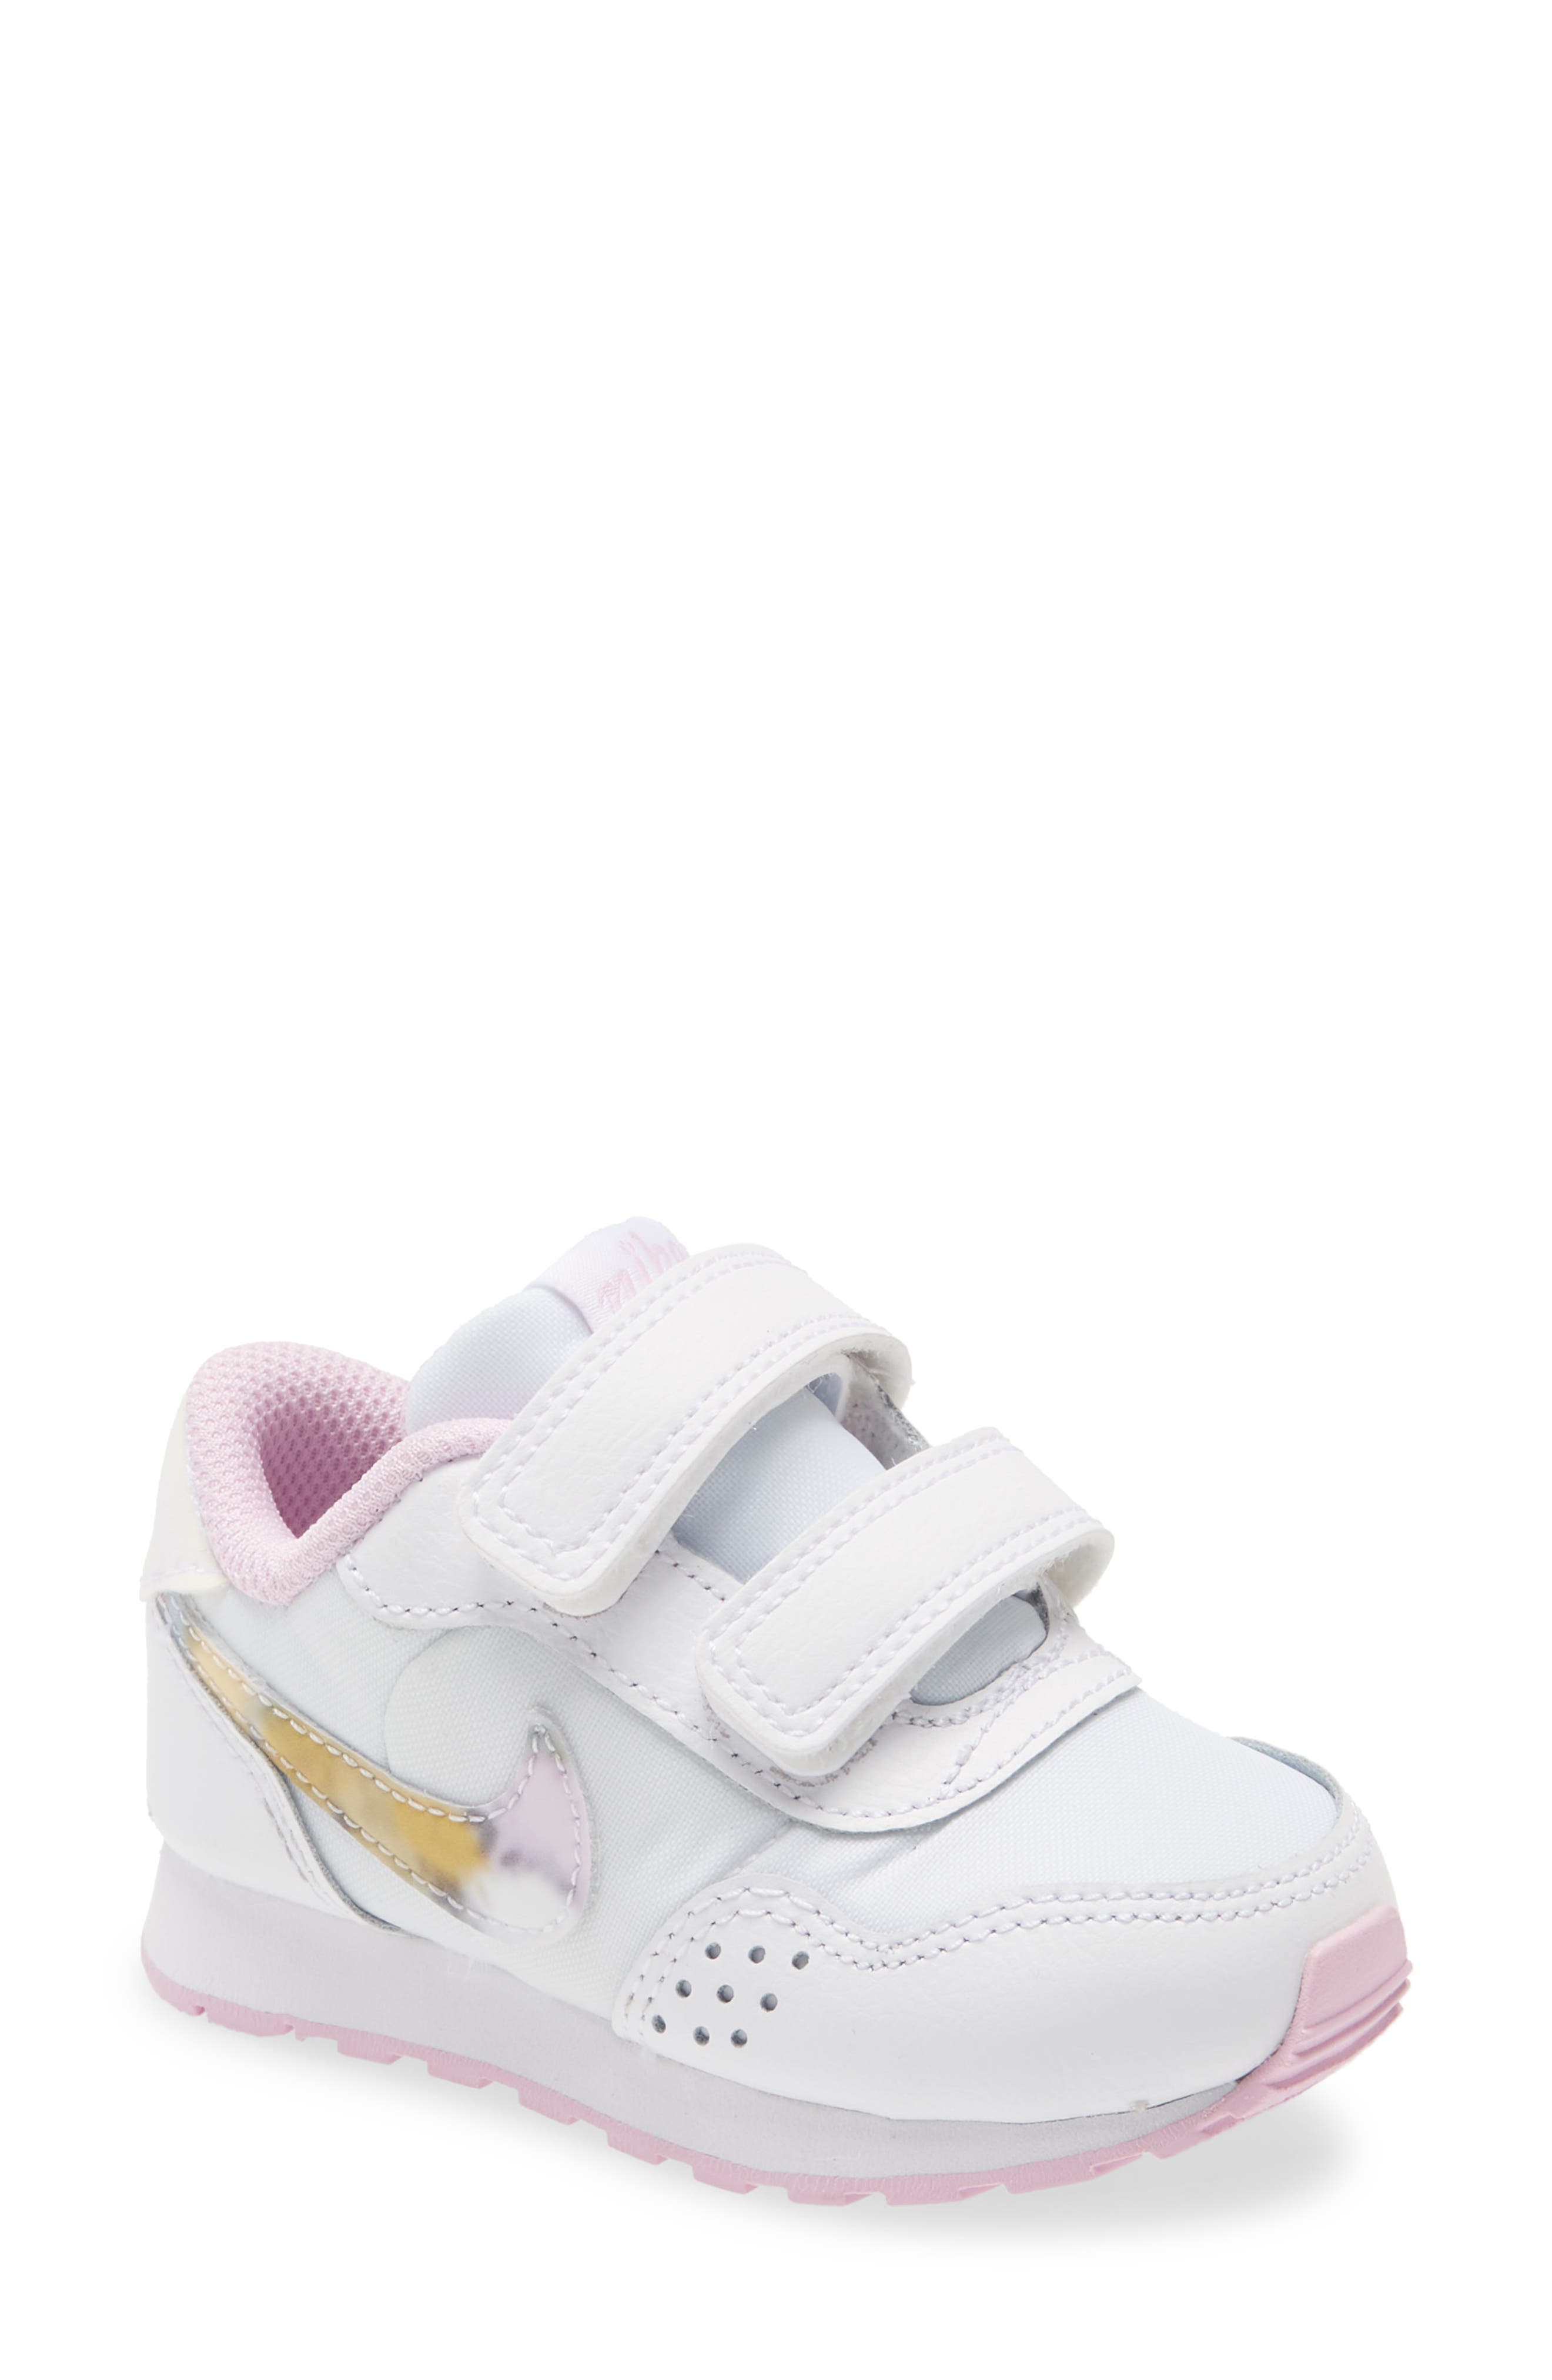 nike baby sandals canada